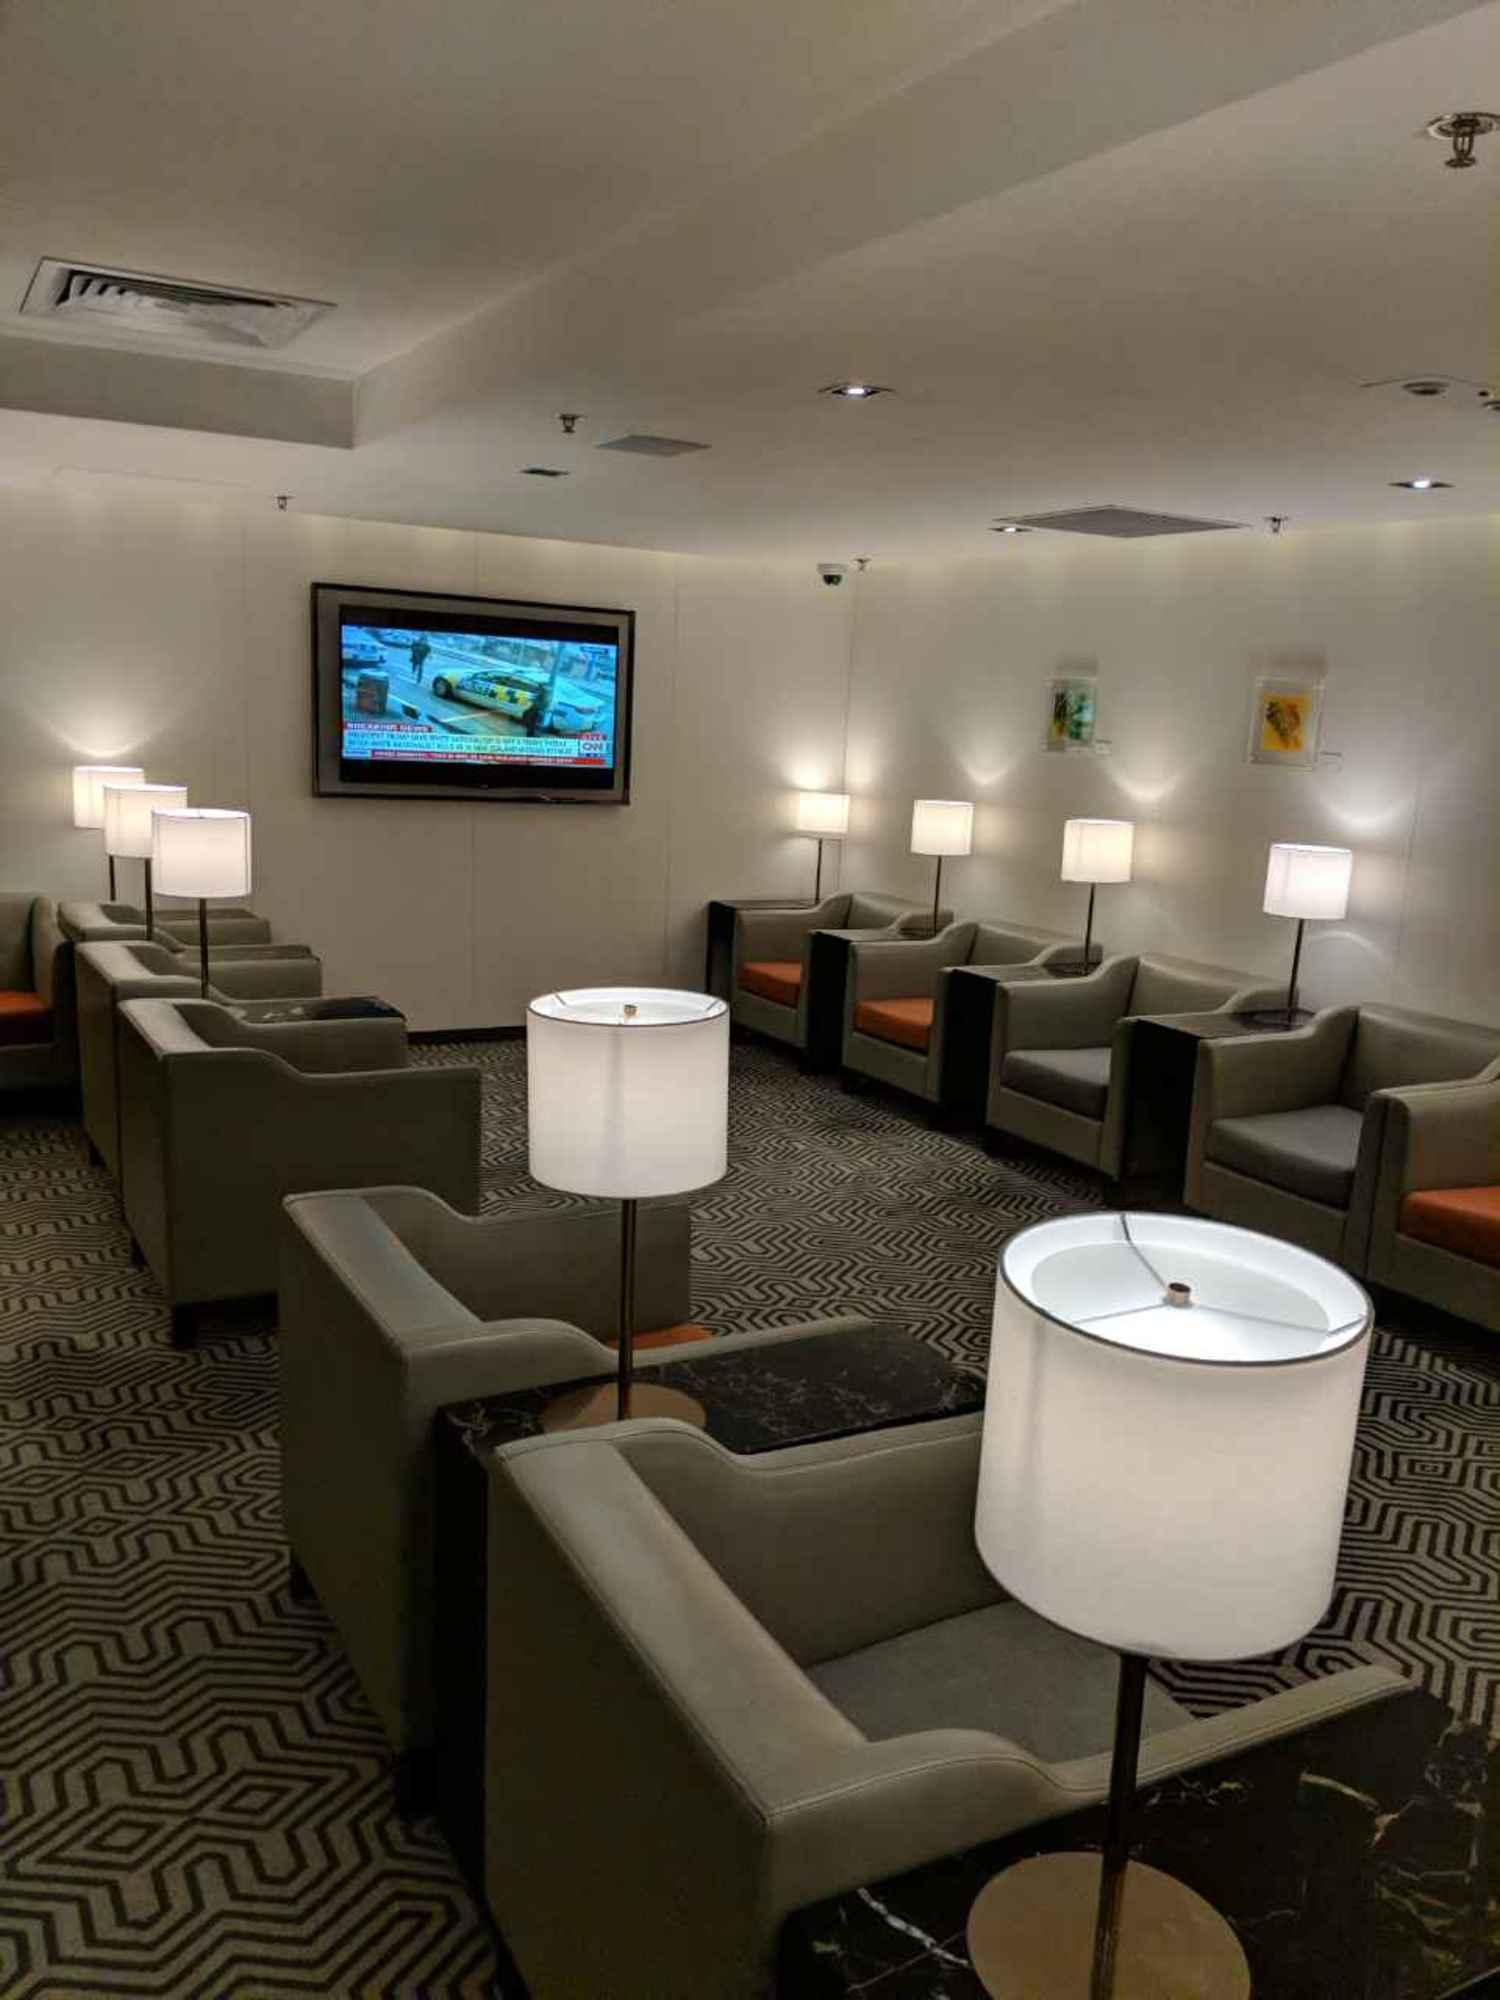 Singapore Airlines SilverKris Business Class Lounge image 52 of 68